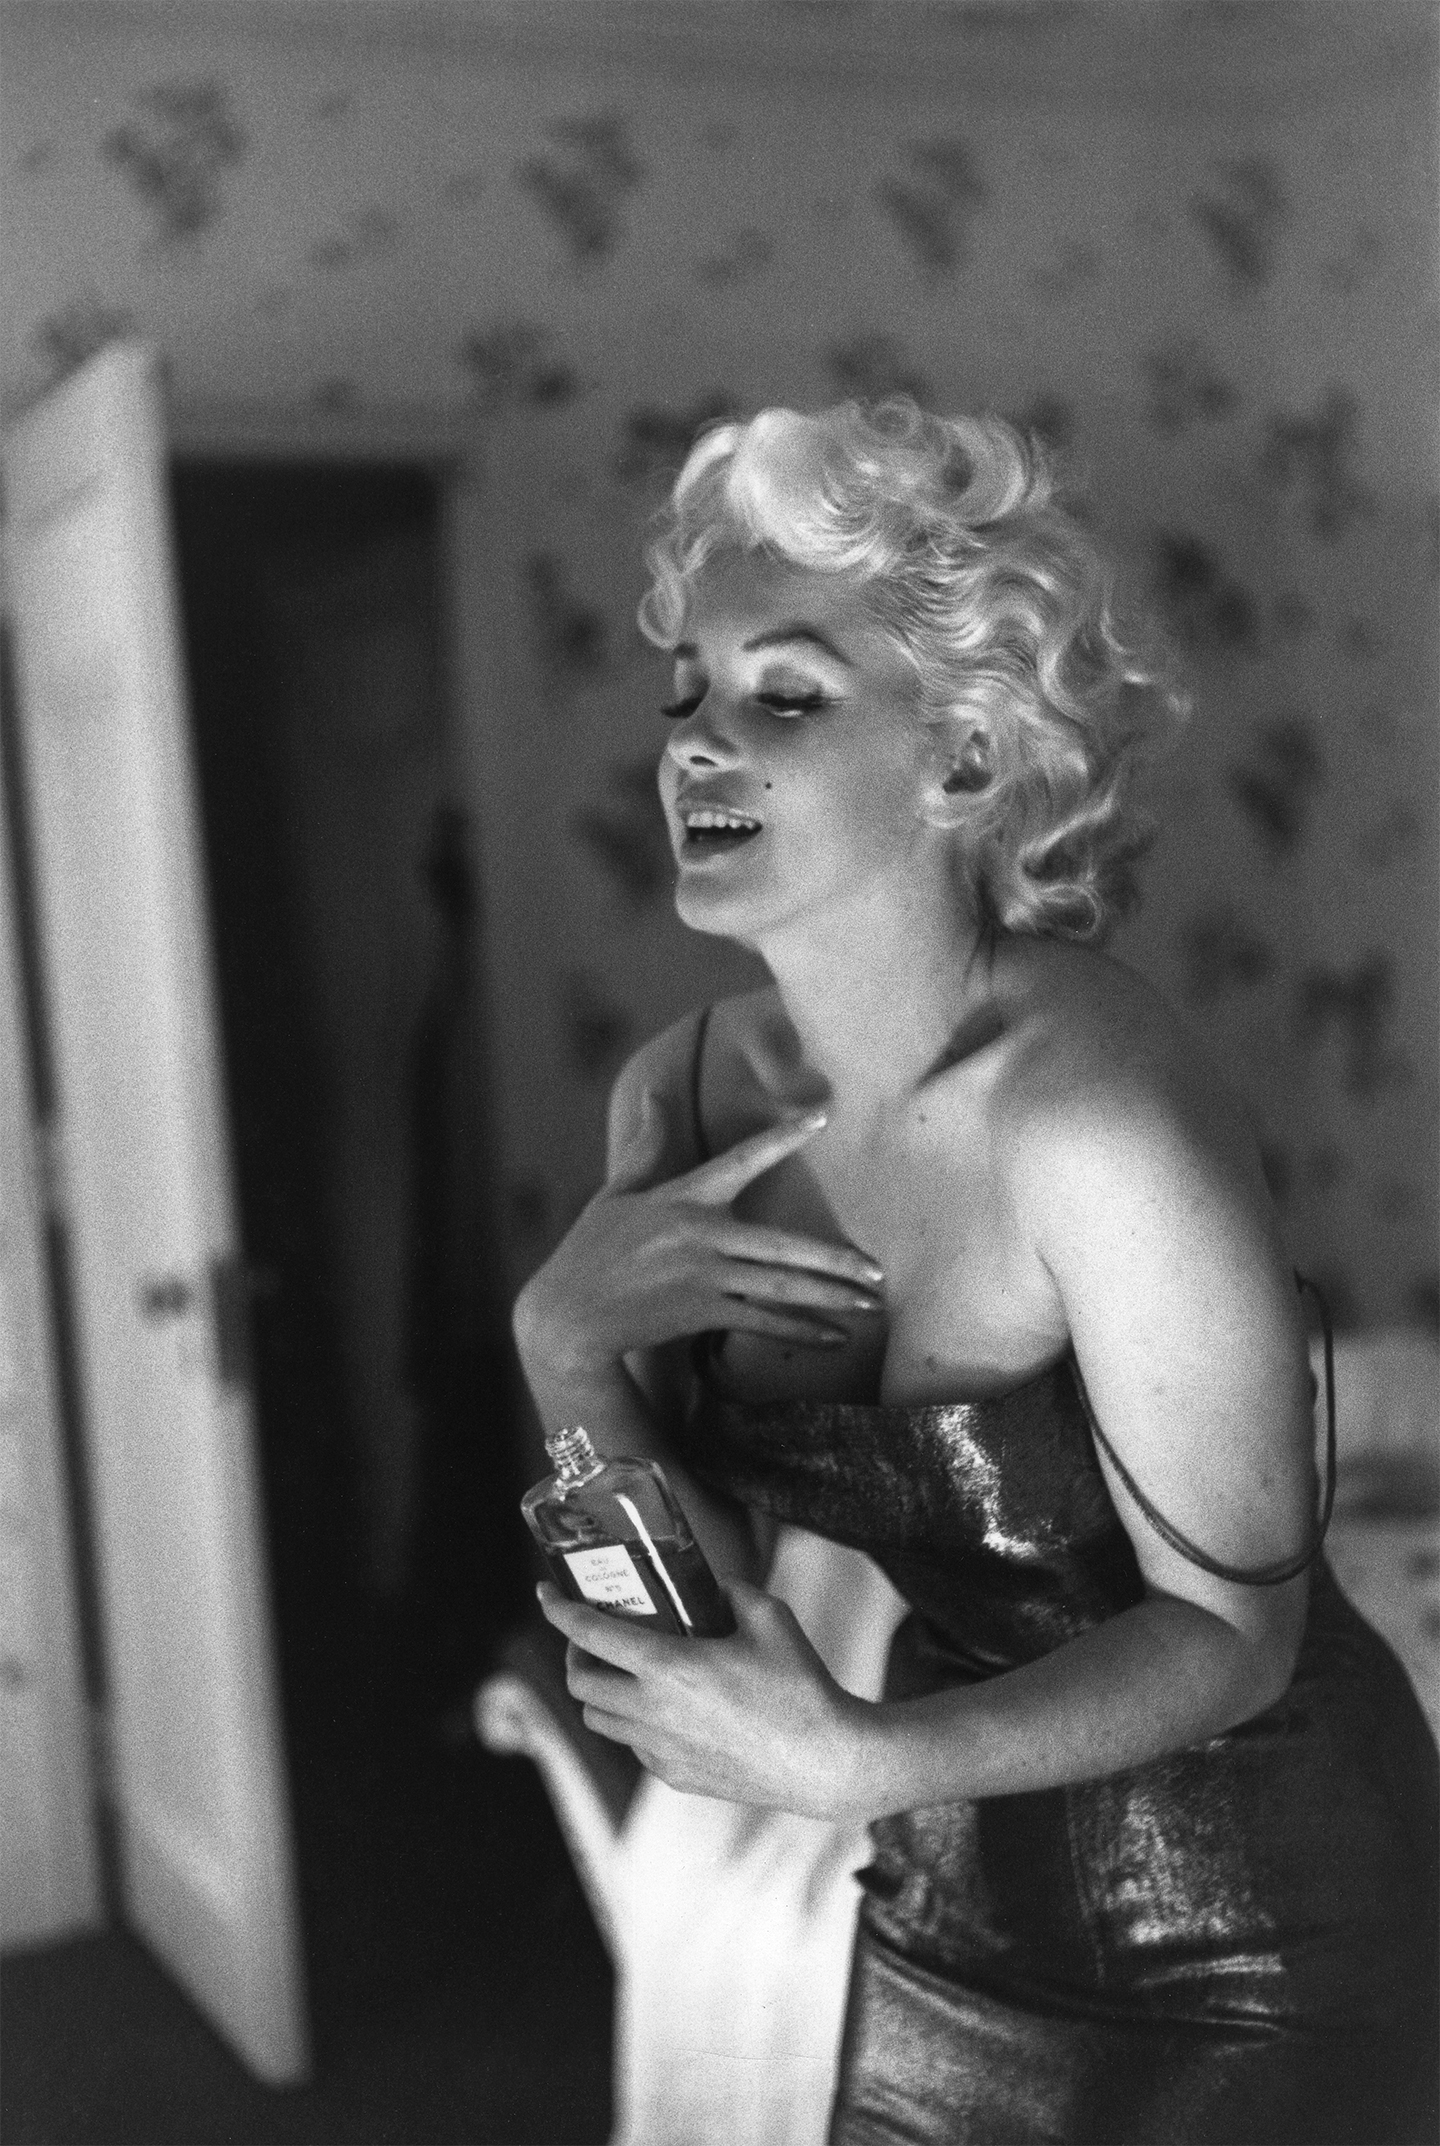 Marilyn Monroe applying Chanel N°5 at the Ambassador Hotel, New York, 24 March 1955. Photograph by Ed Feingersh ©Ed Feingersh/Michael Ochs Archives/Getty Images. Courtesy of Victoria and Albert Museum, London